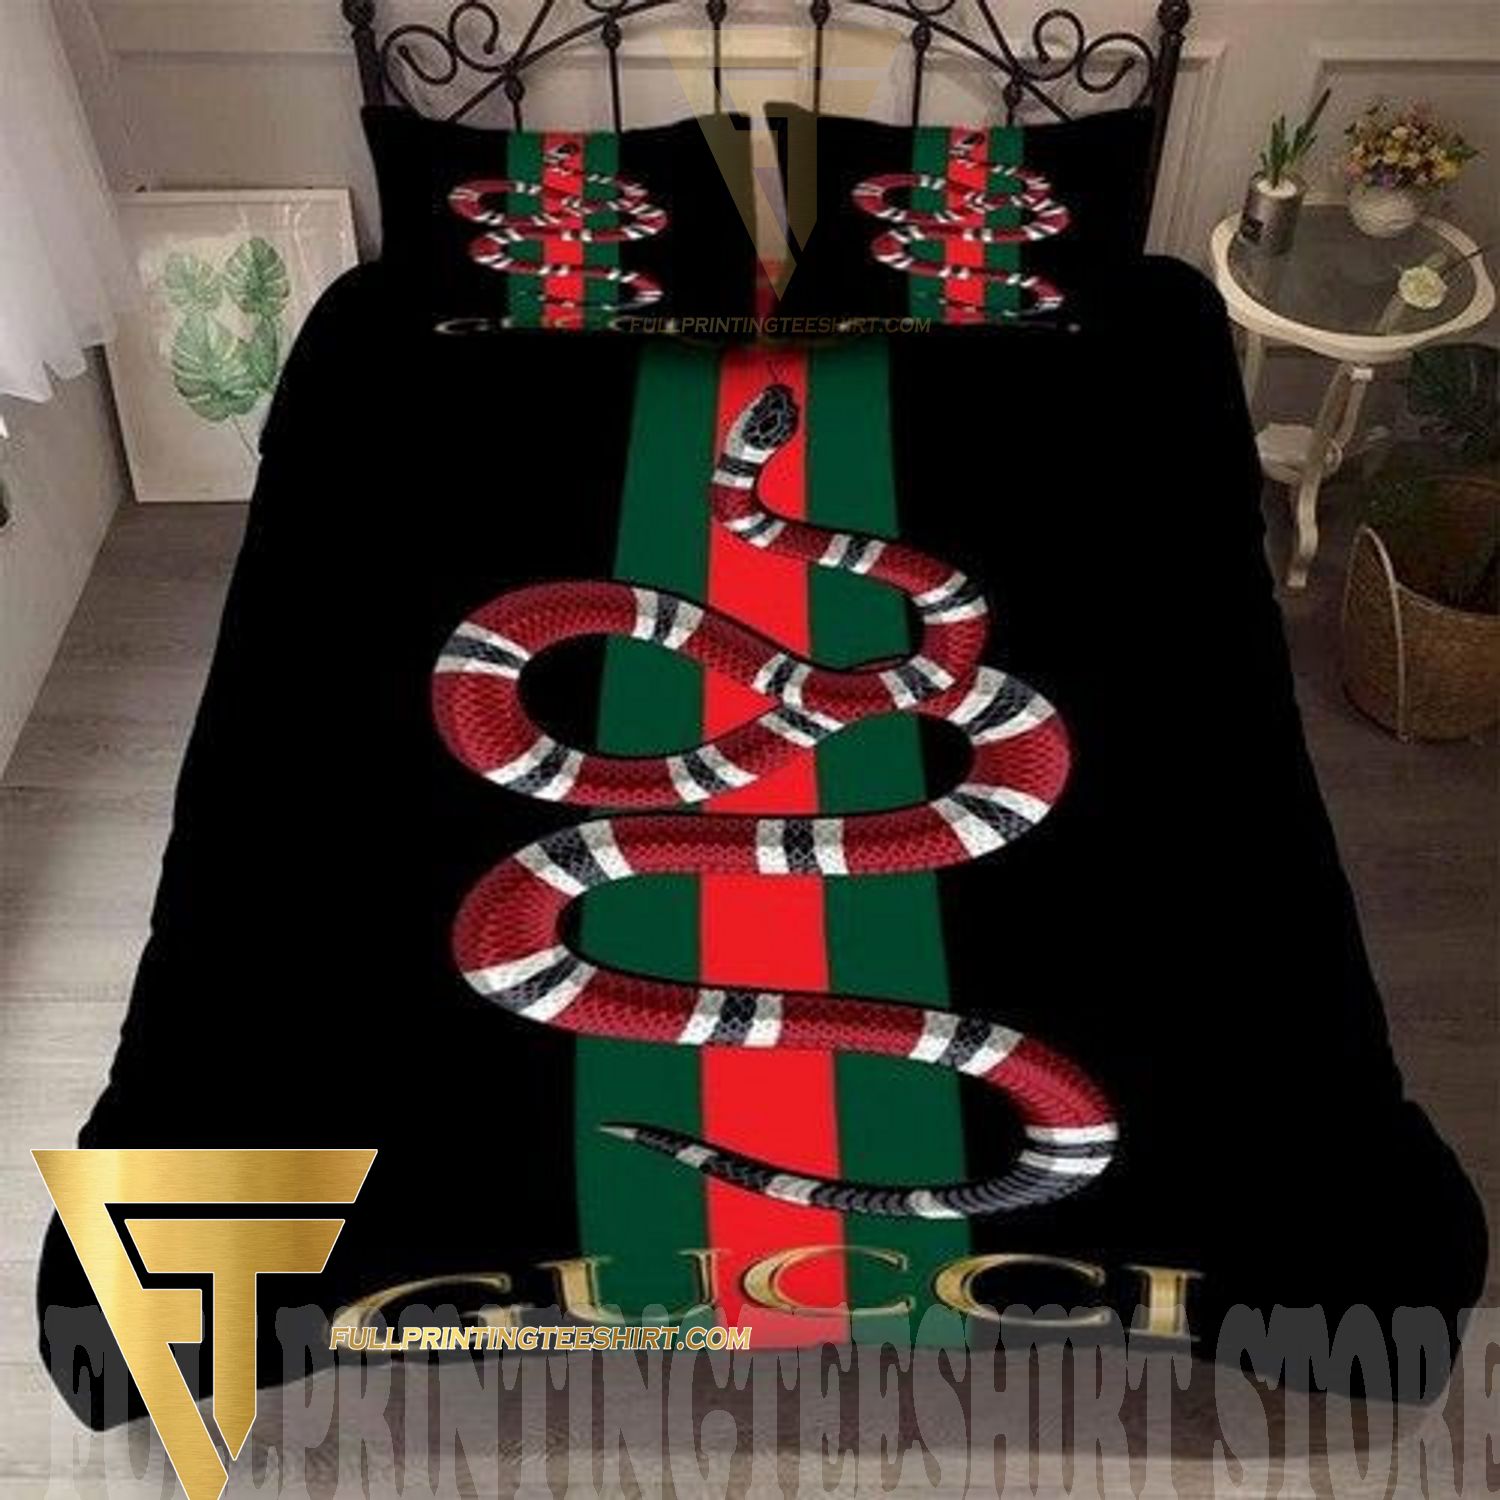 Top-selling item] Gucci 06 Bedding Sets Bedroom Luxury Brand